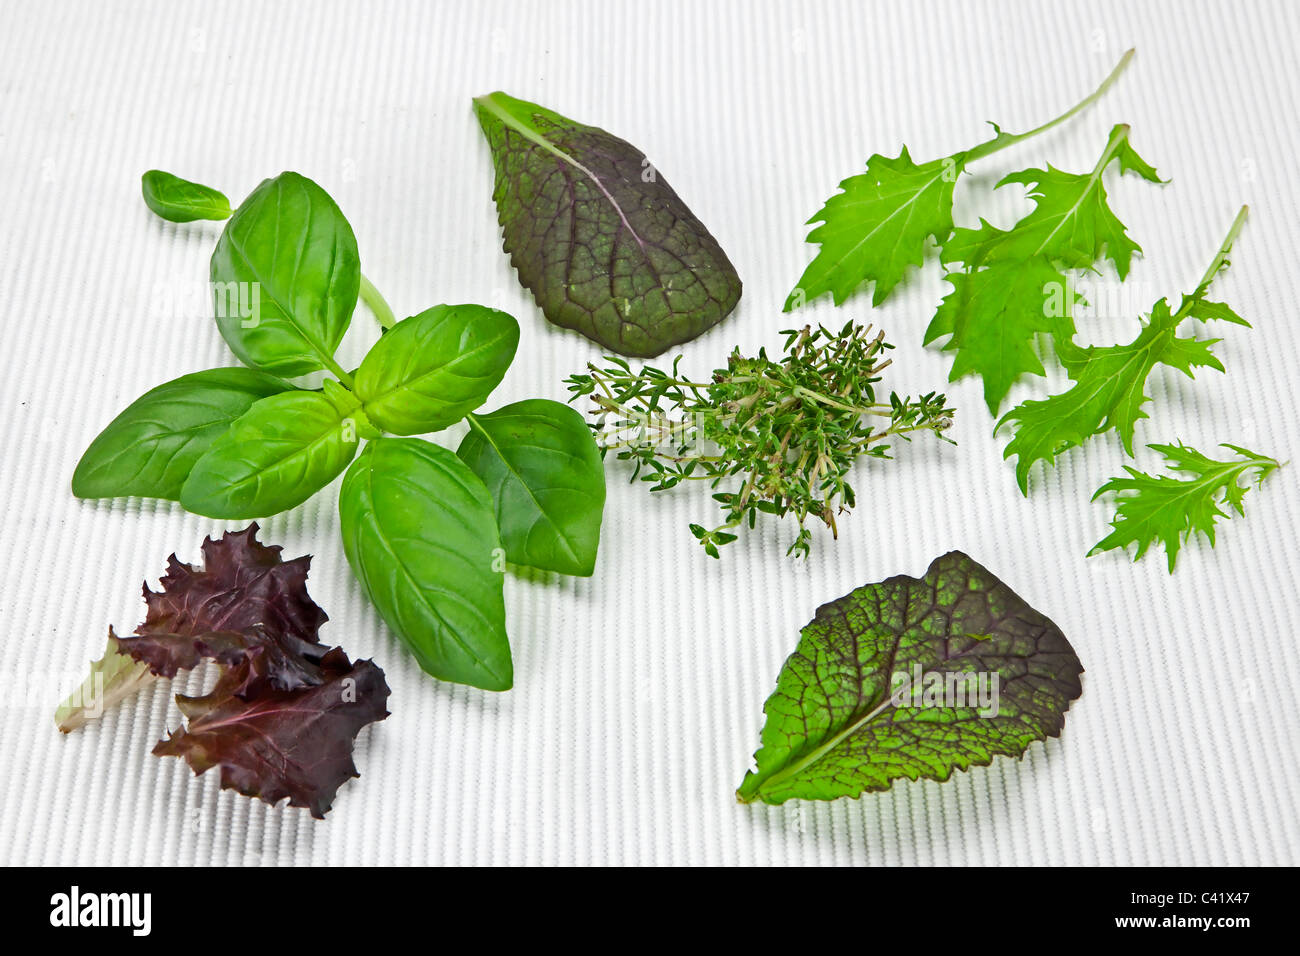 variety of lettuces and herbs on a white mat Stock Photo